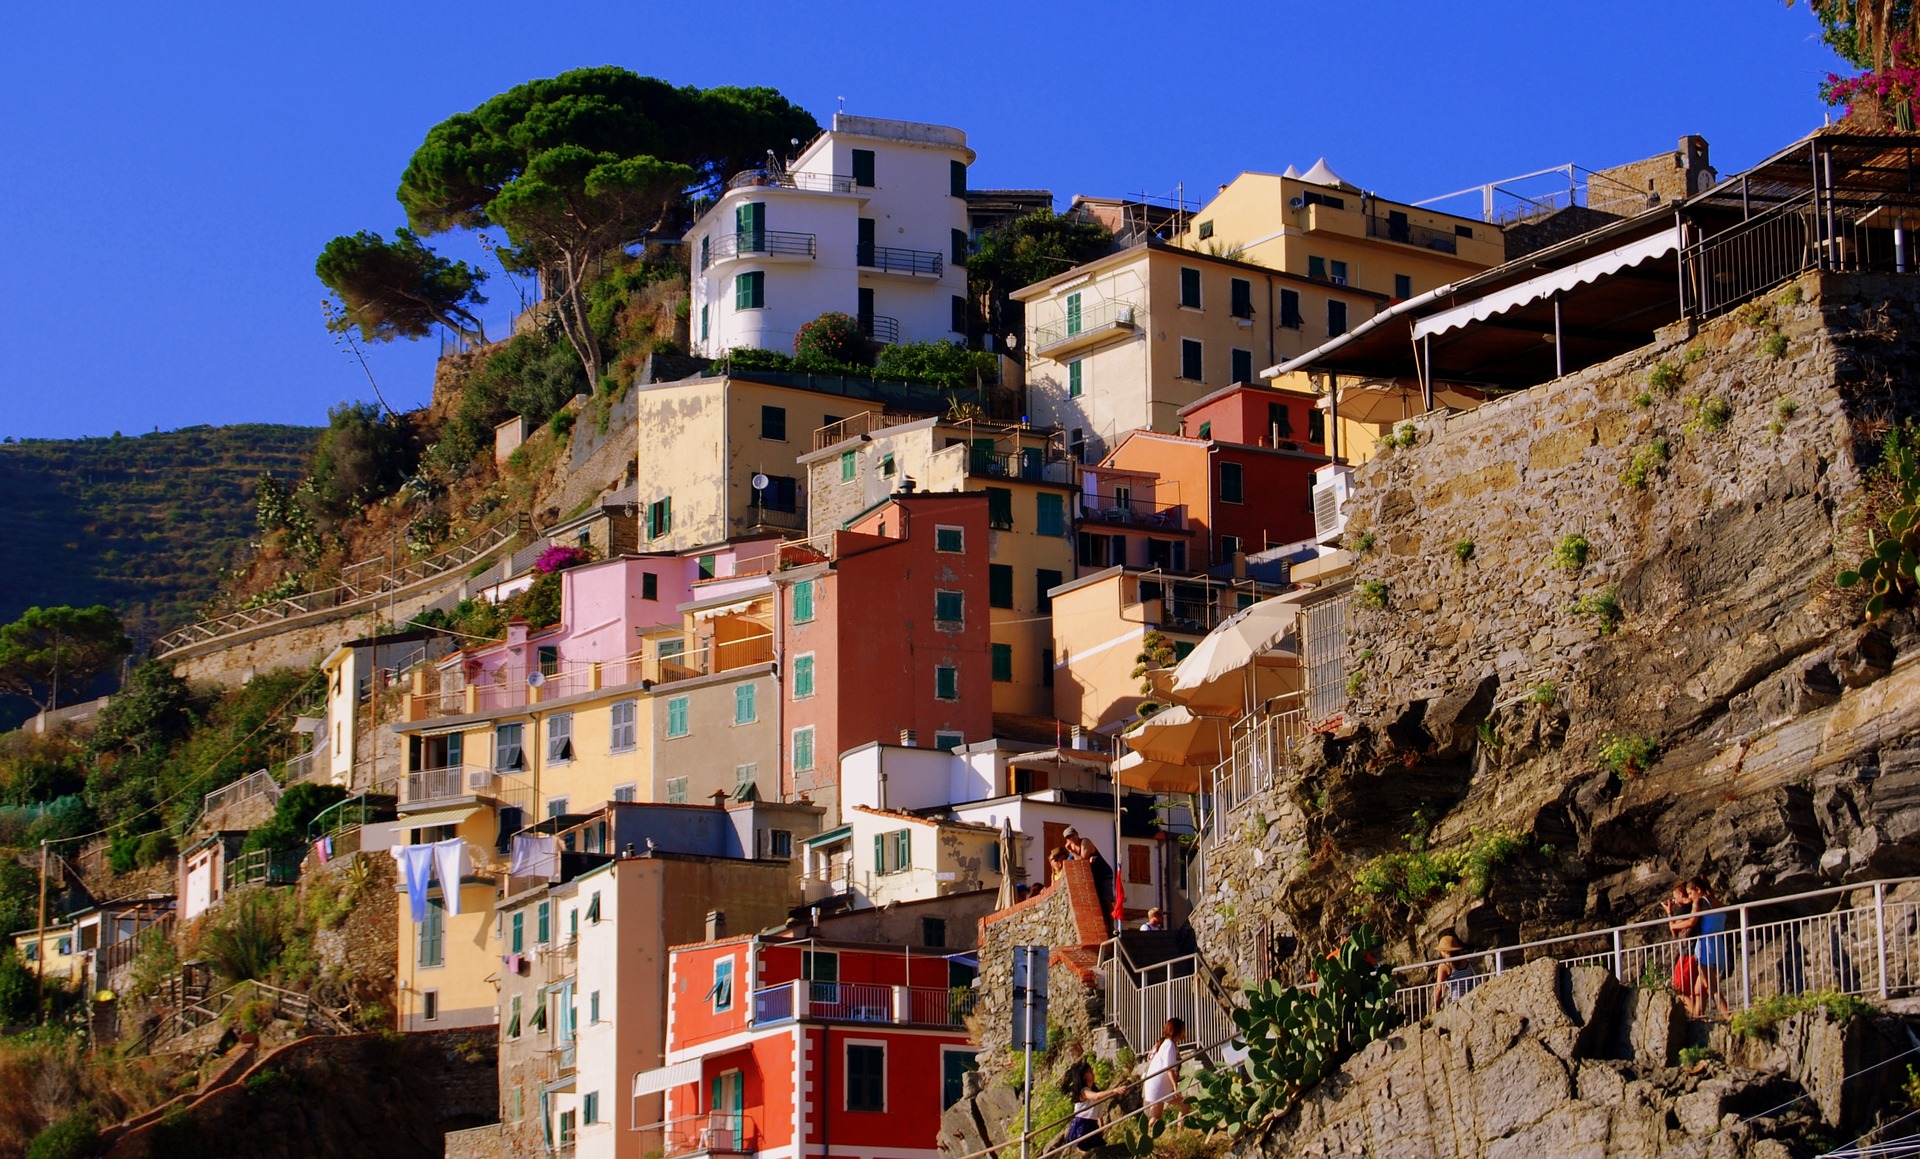 Houses in Cinque Terre